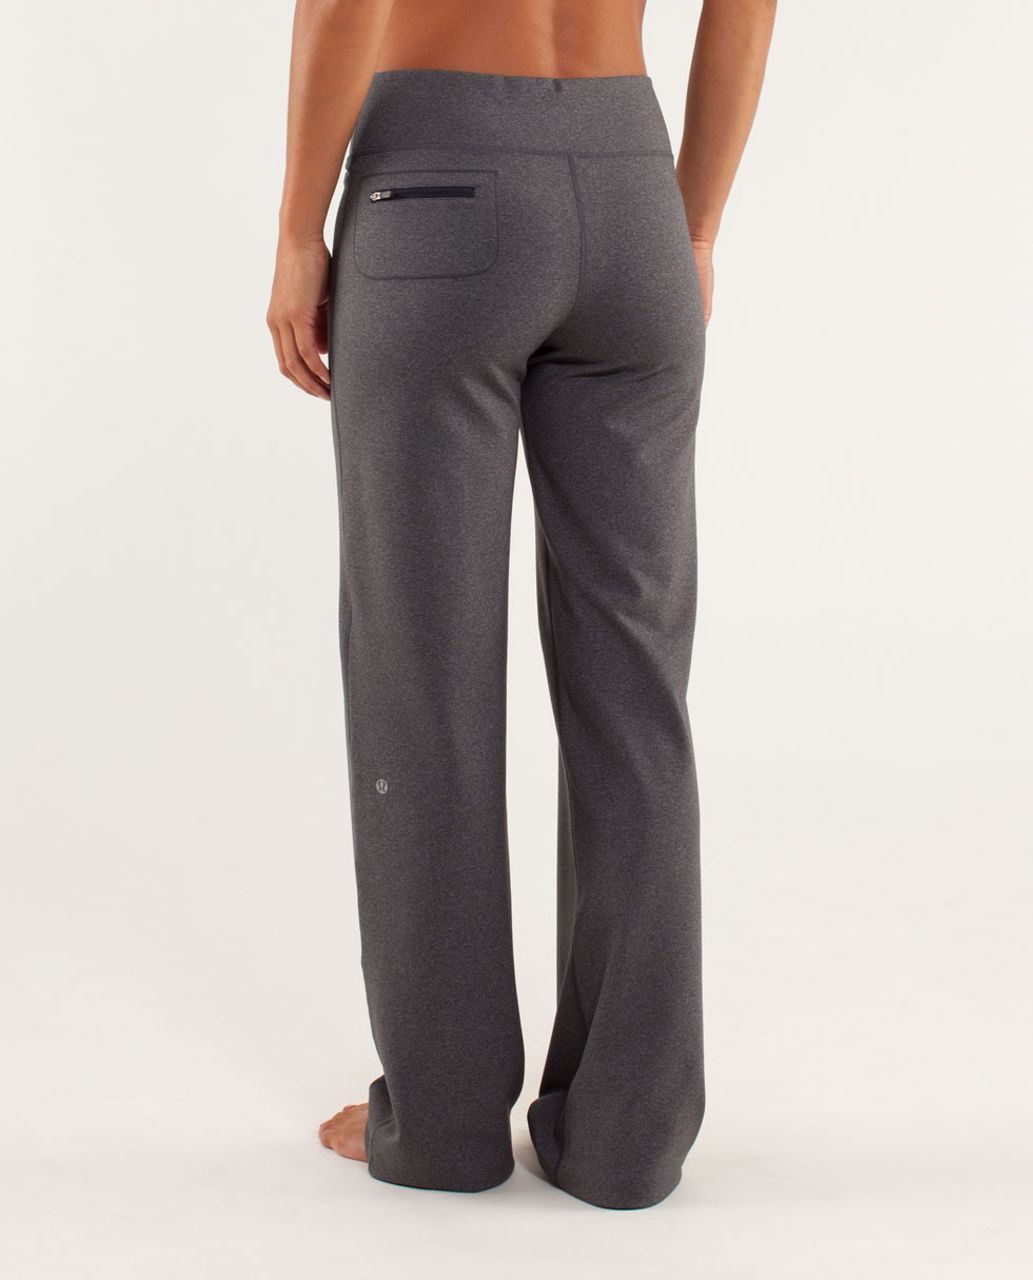 Lululemon Relaxed Fit Pant - Heathered Deep Coal